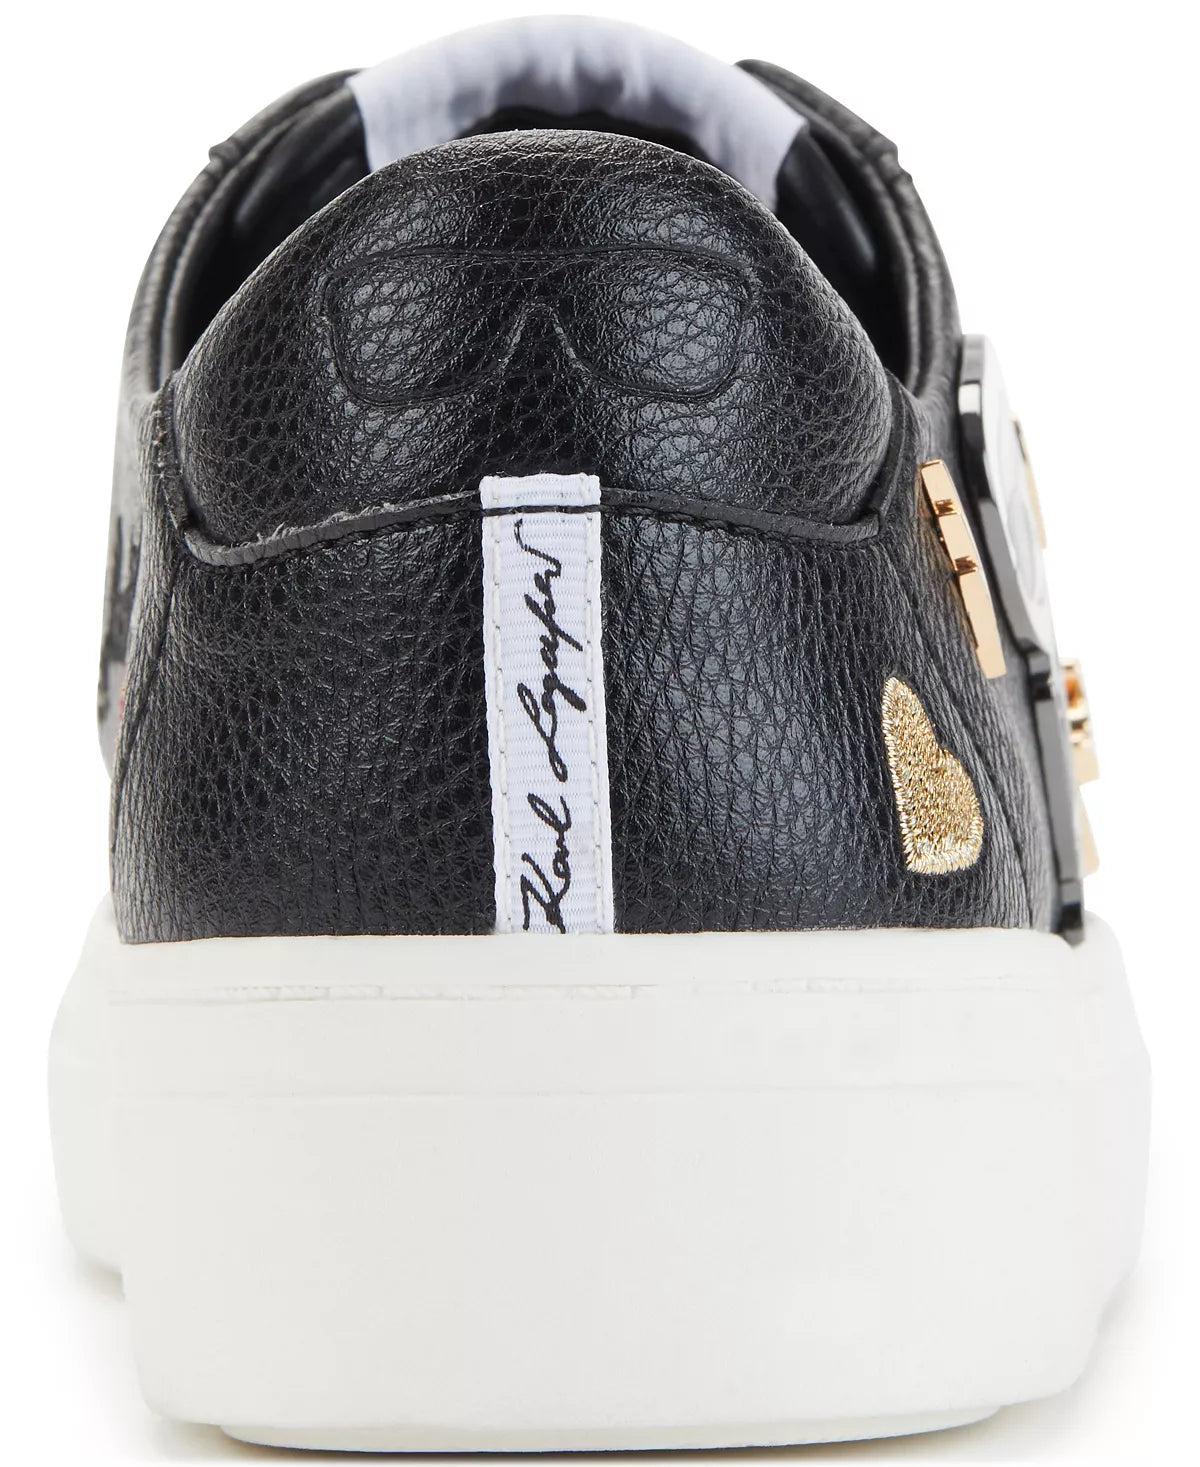 Women's Cate Embellished Sneakers